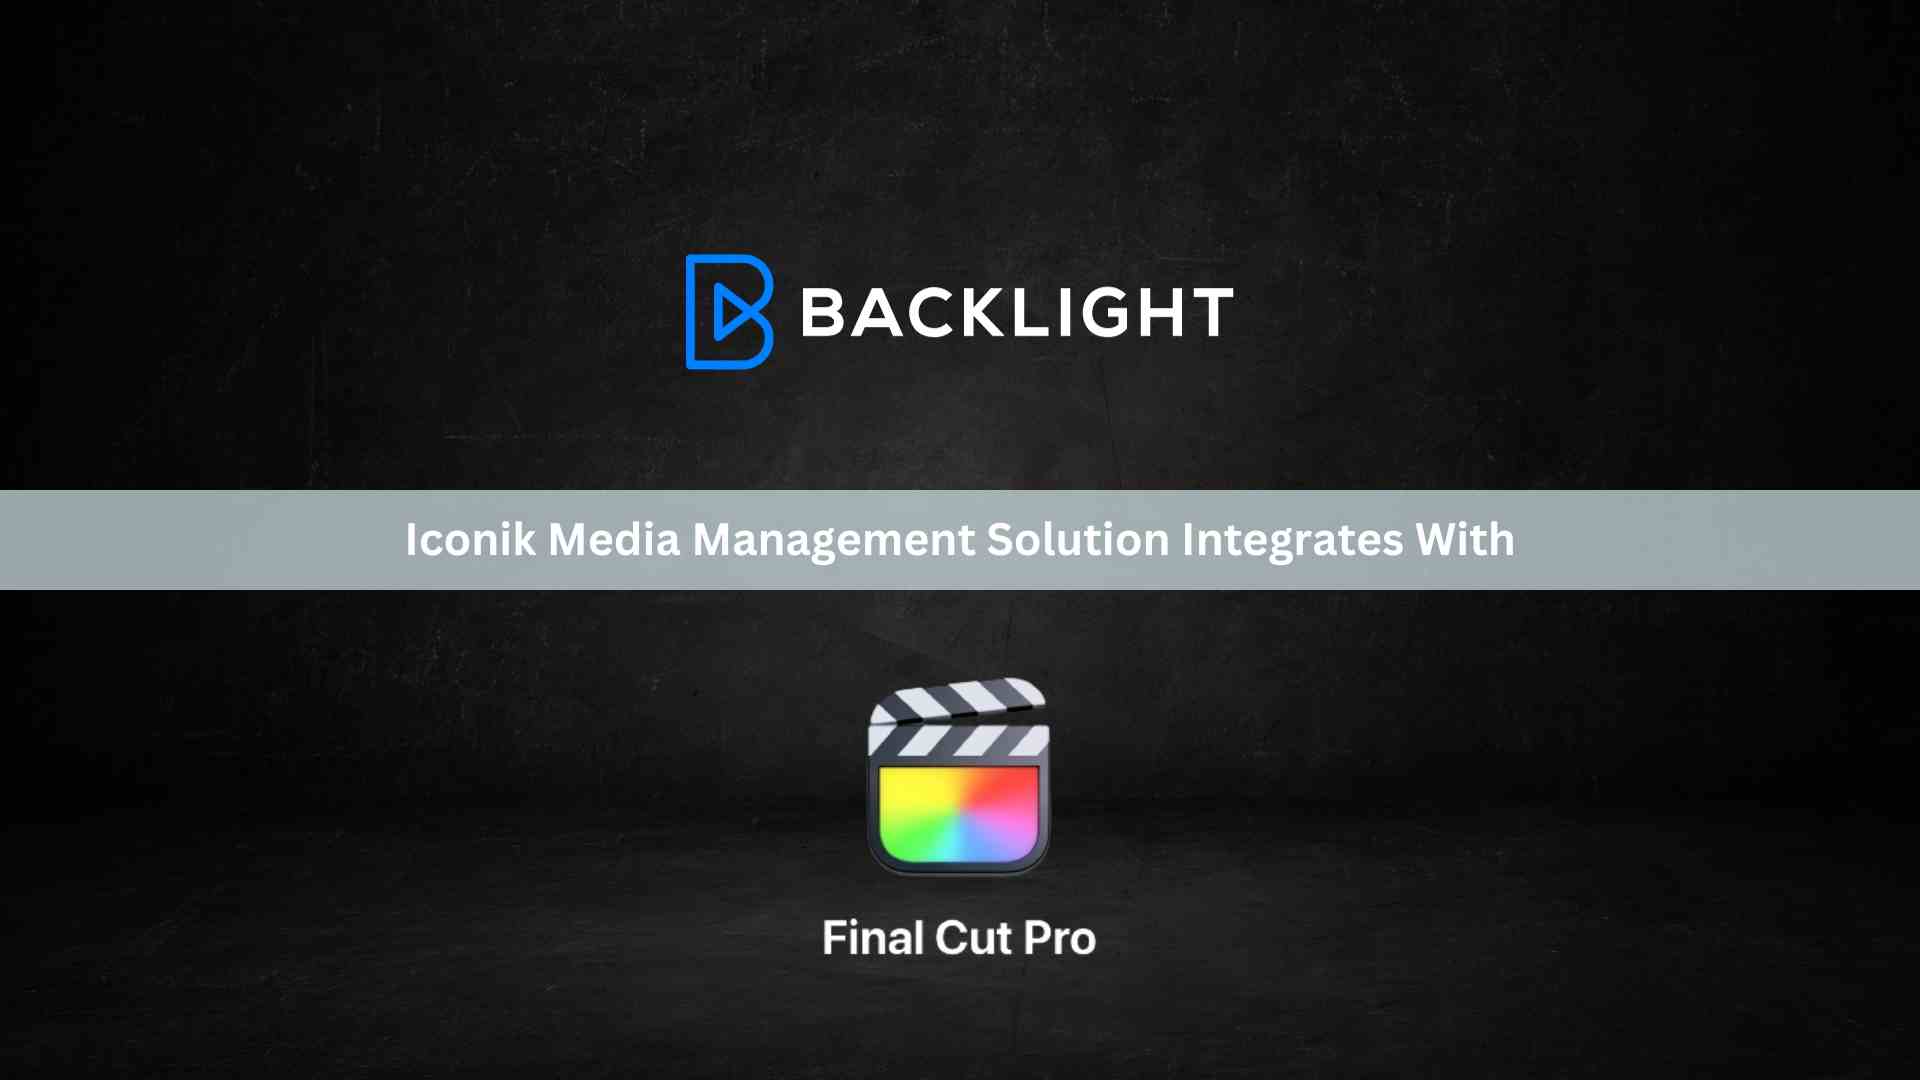 Backlight’s iconik Media Management Solution Integrates with Final Cut Pro, Providing a Faster, Streamlined Workflow for Video Production